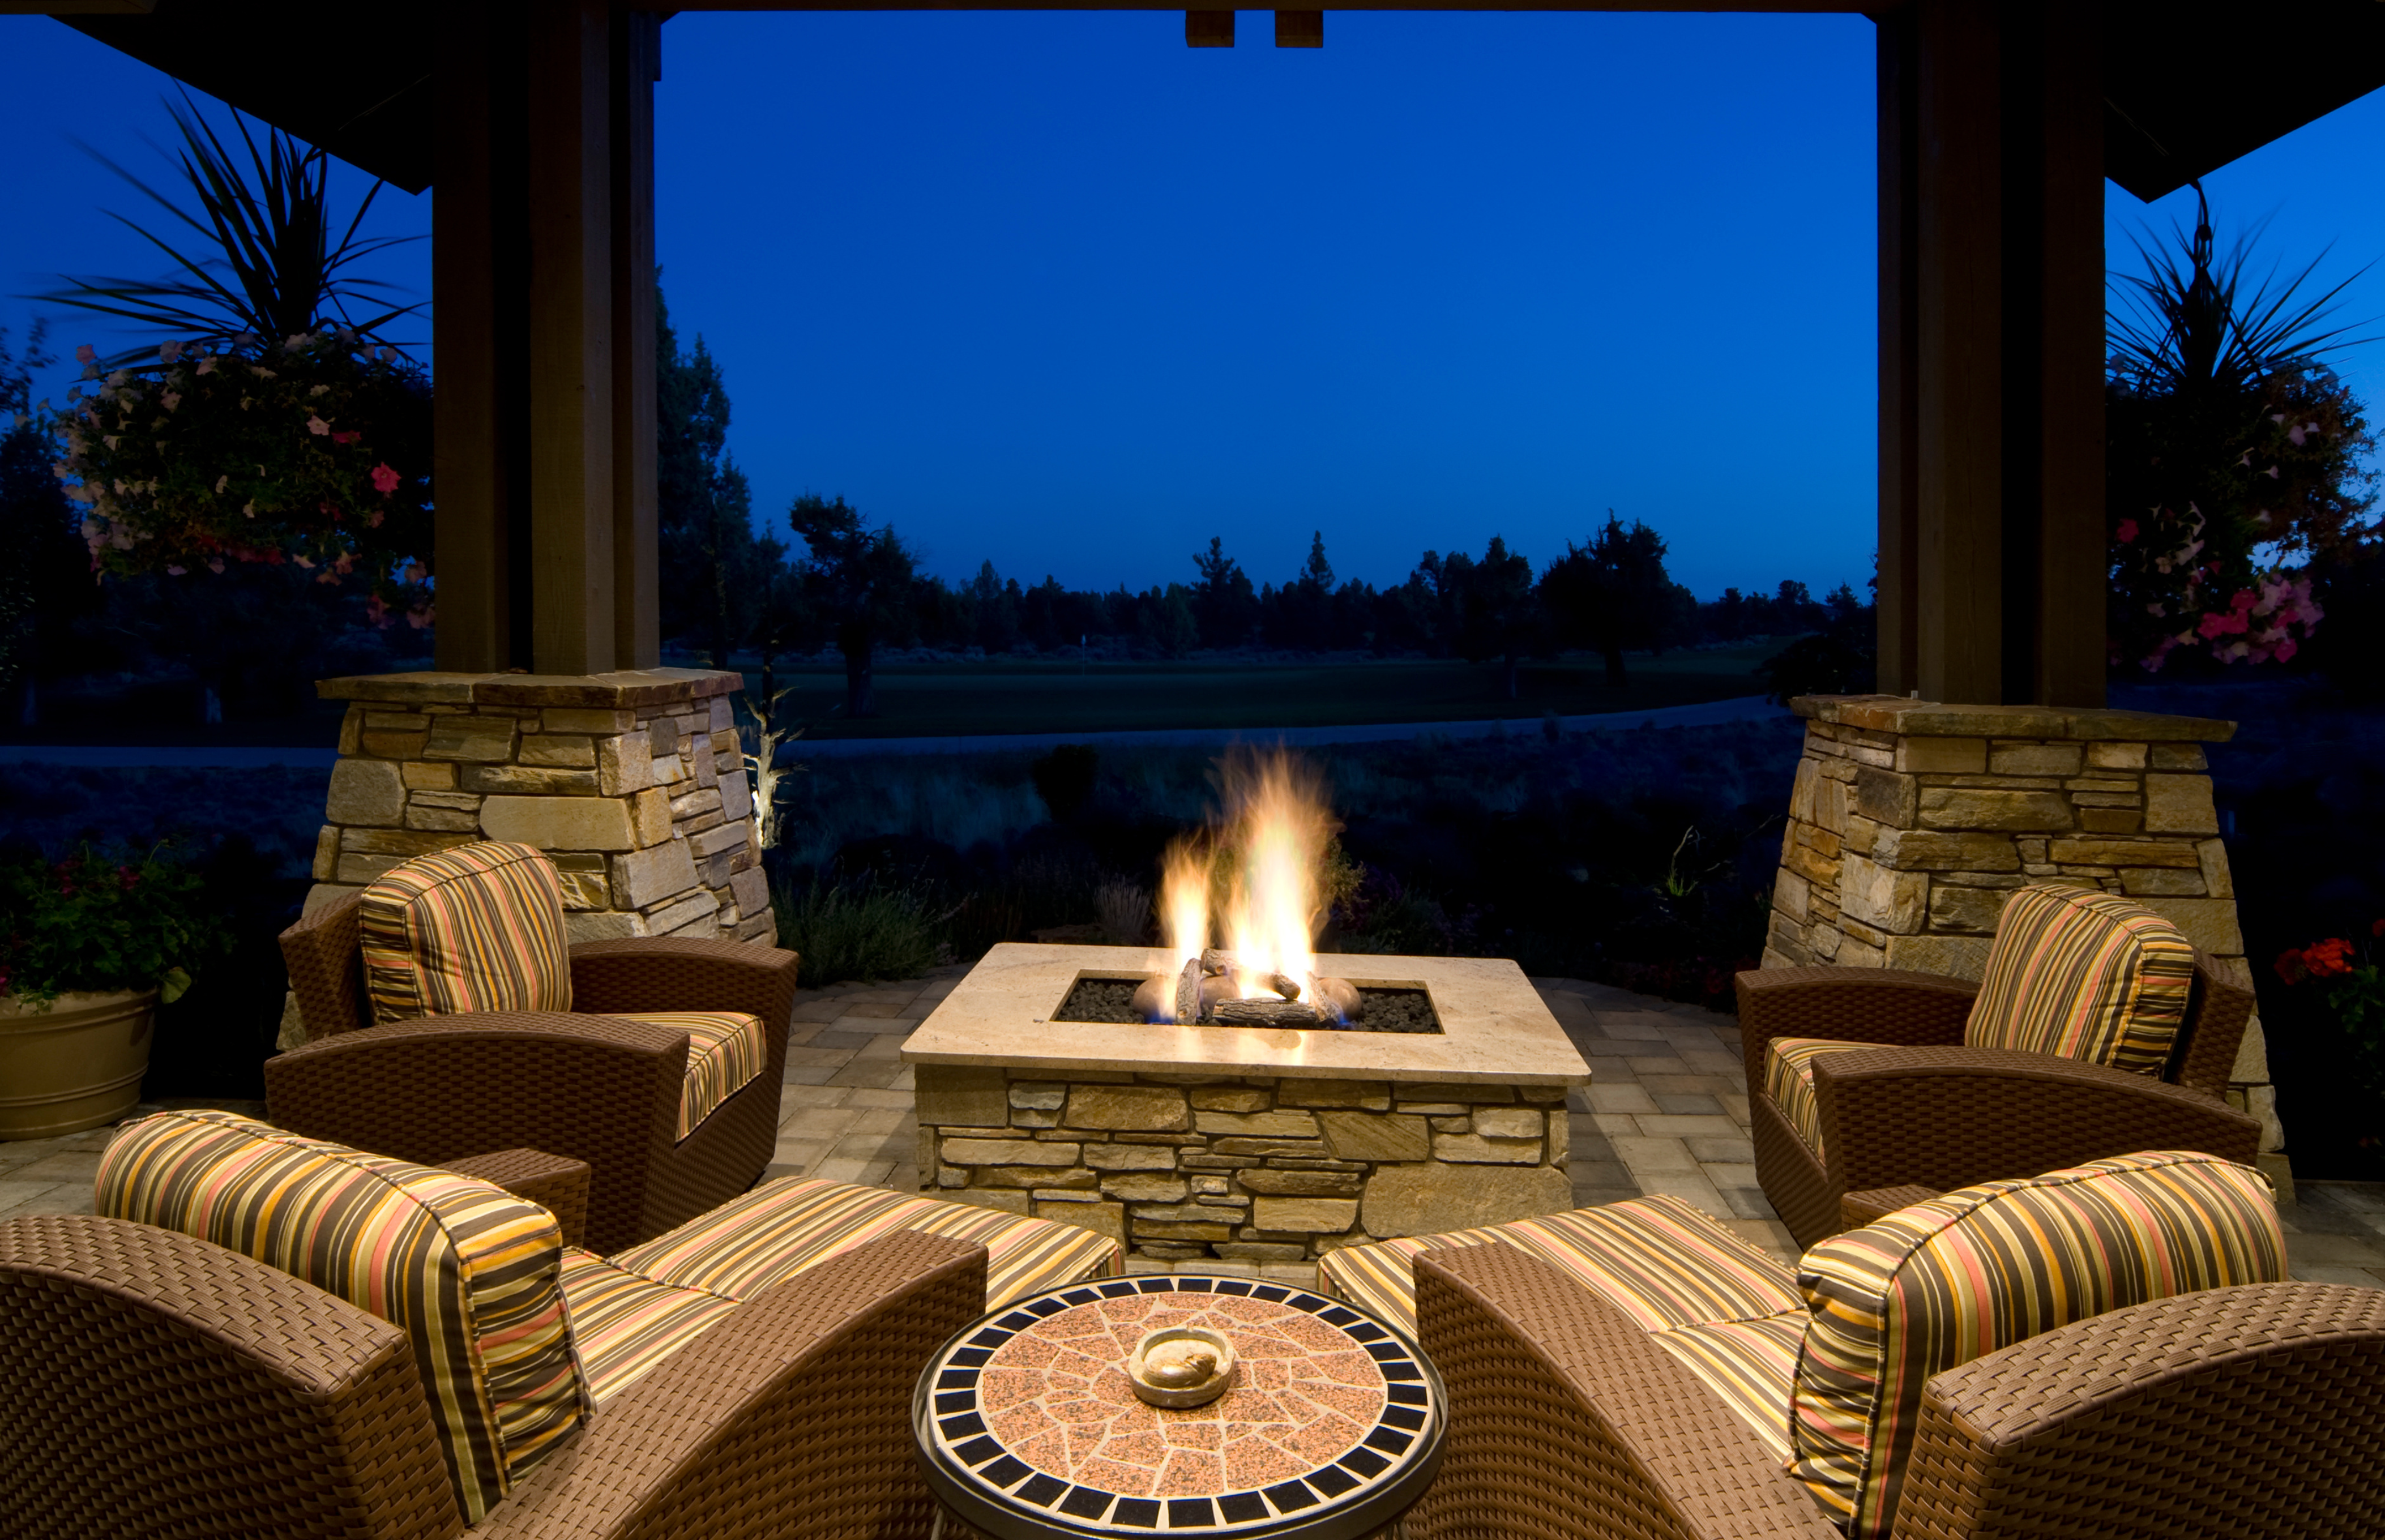 A fire pit is in the center of a patio surrounded by big armchairs just waiting for people to come and sit in them.